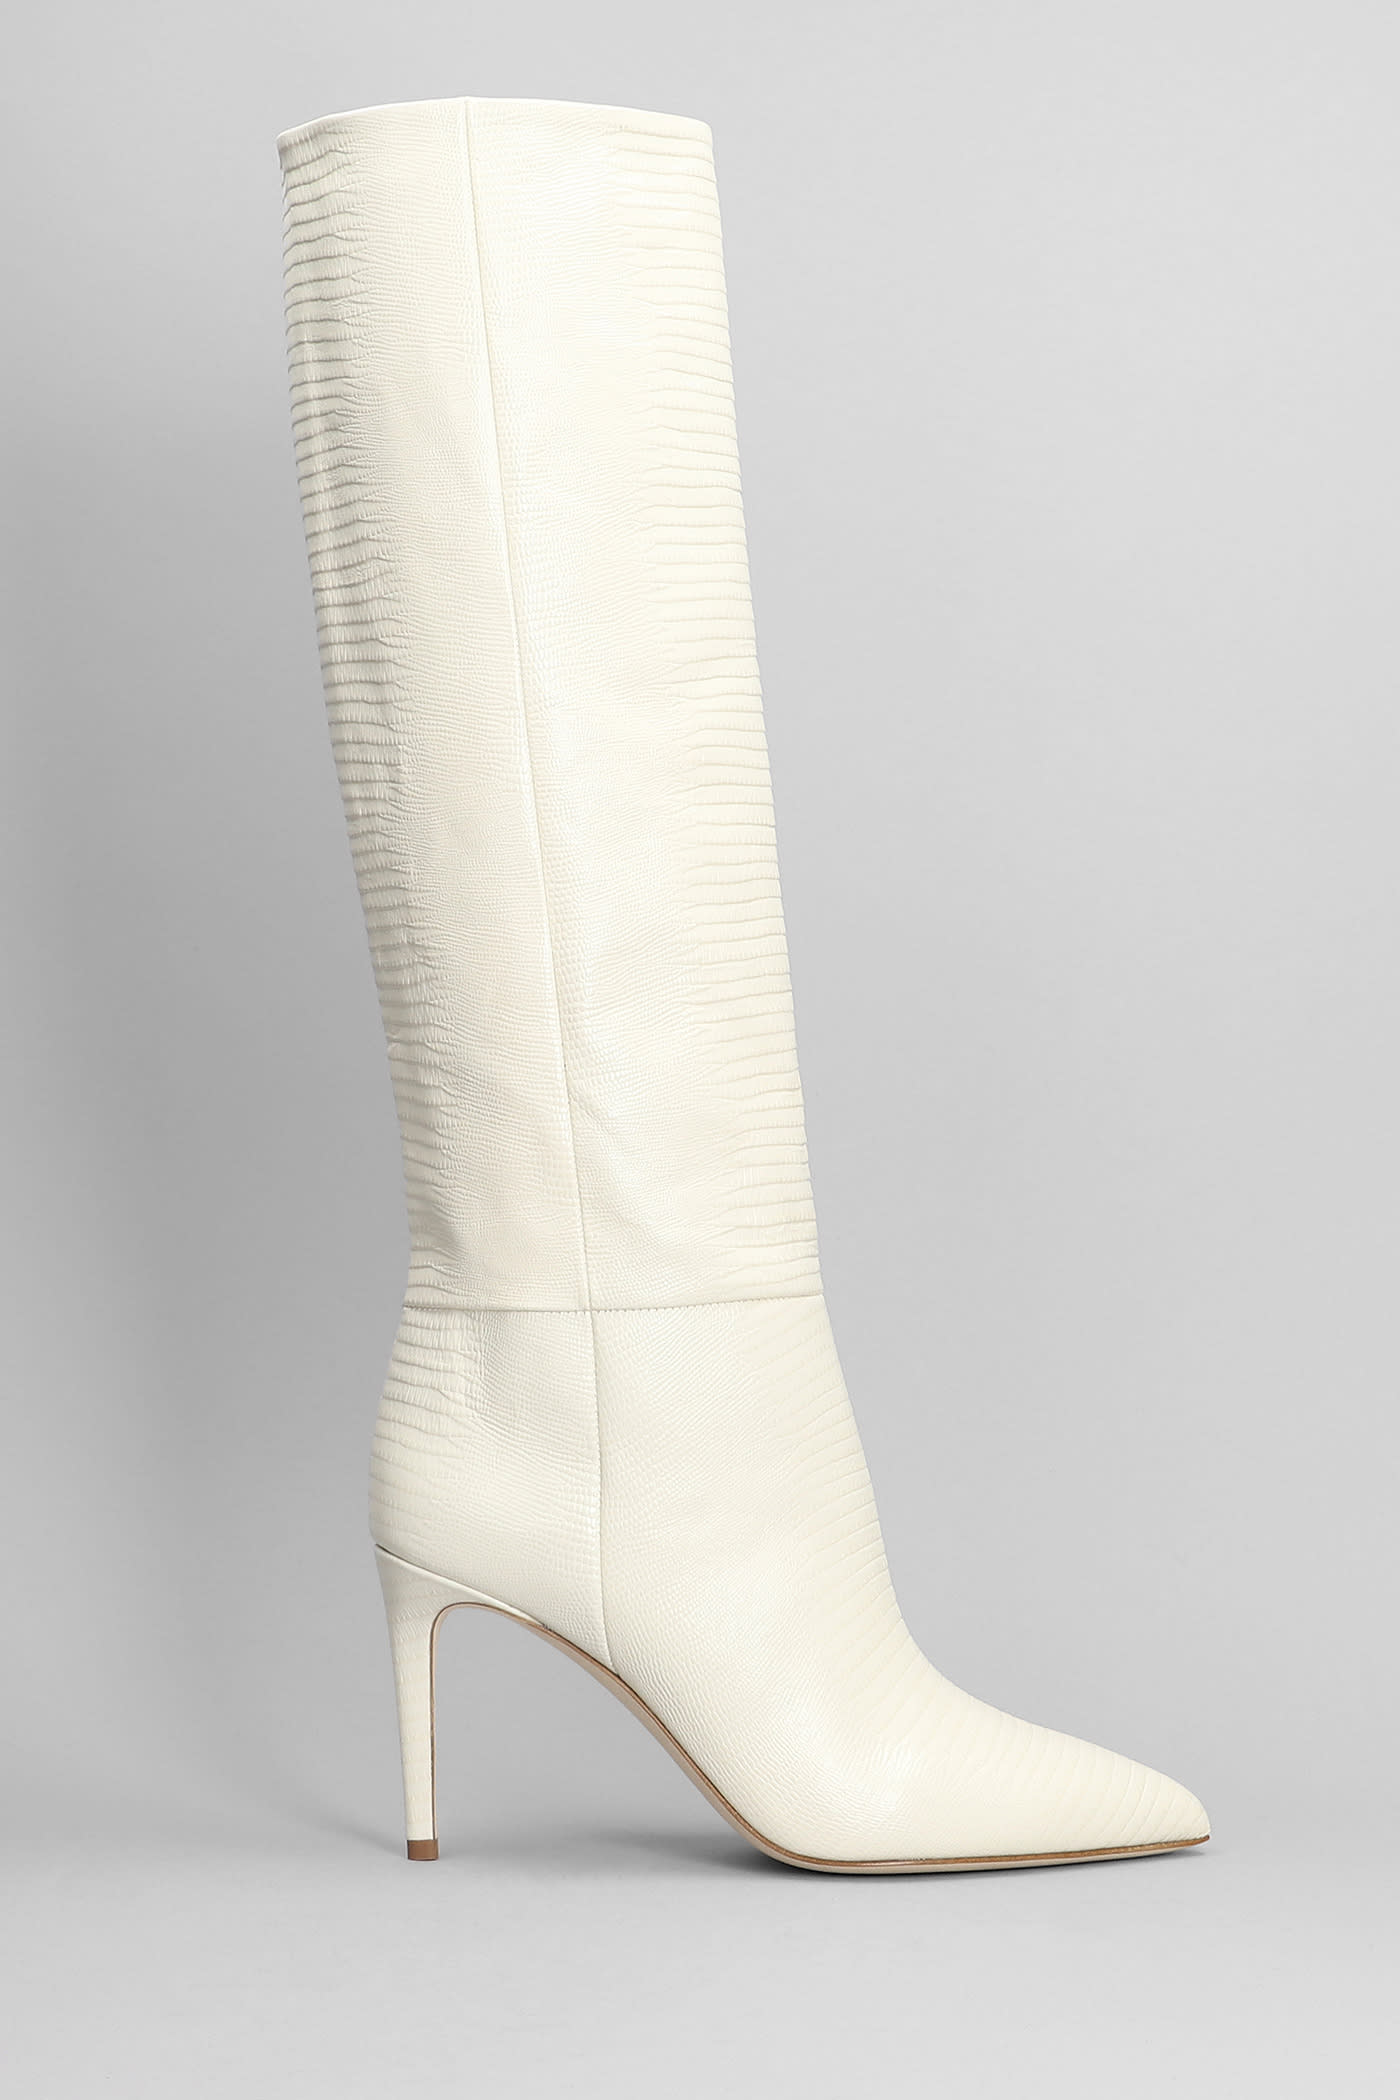 Paris Texas High Heels Boots In Beige Leather In White